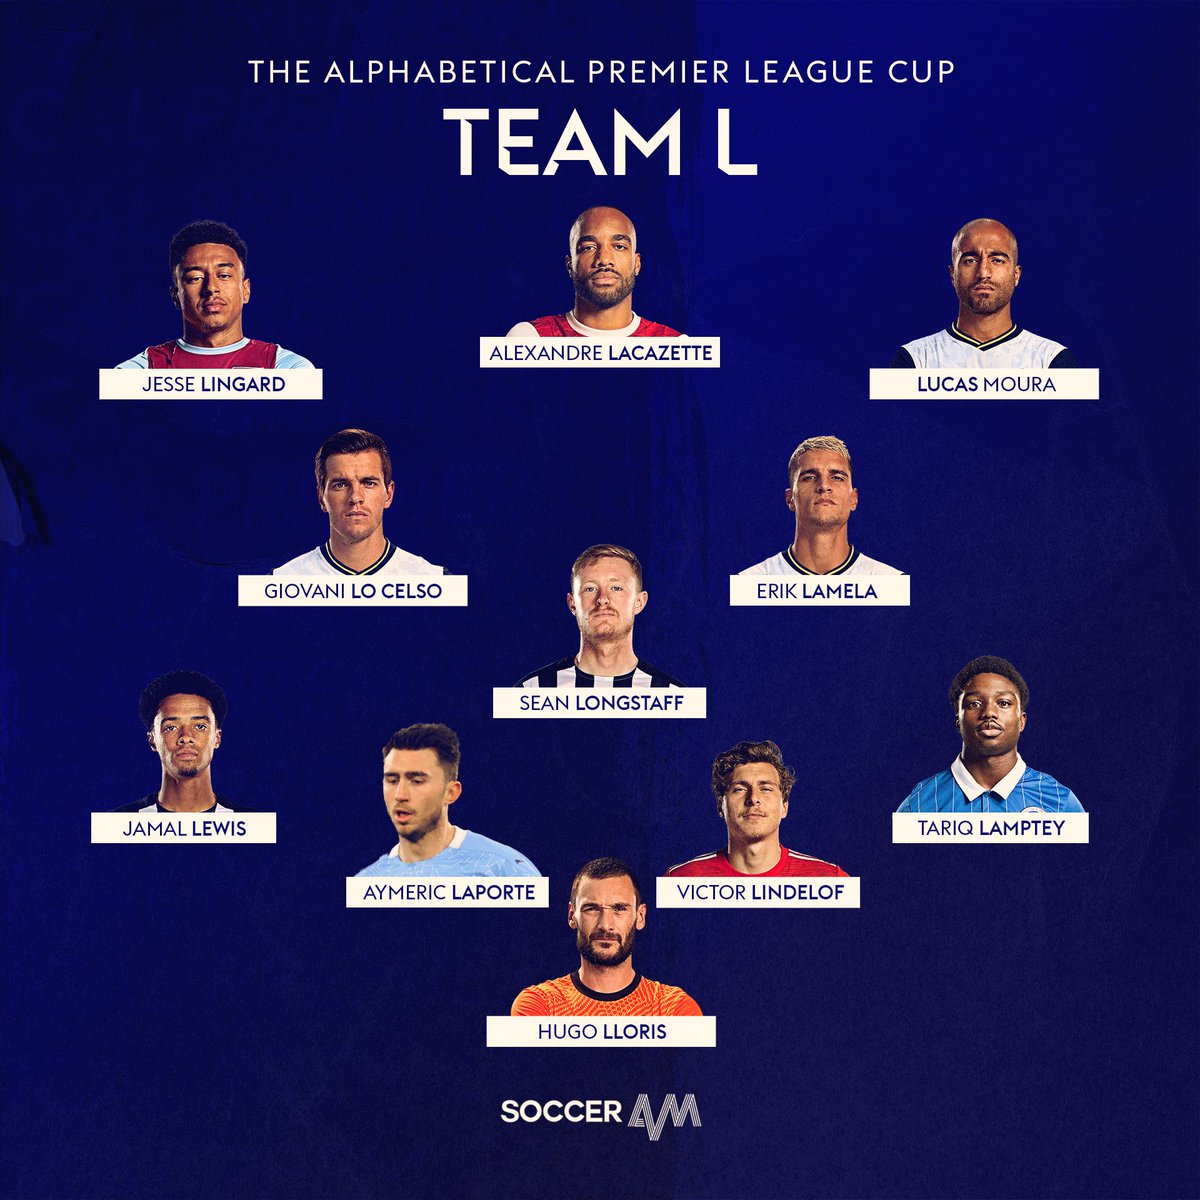 Team L A very talented bunch.Pace in droves, trickery throughout and a solid back-line in front of Lloris. These boys will have their sights set on silverware. Star man: Jesse Lingard Captain: Aymeric Laporte